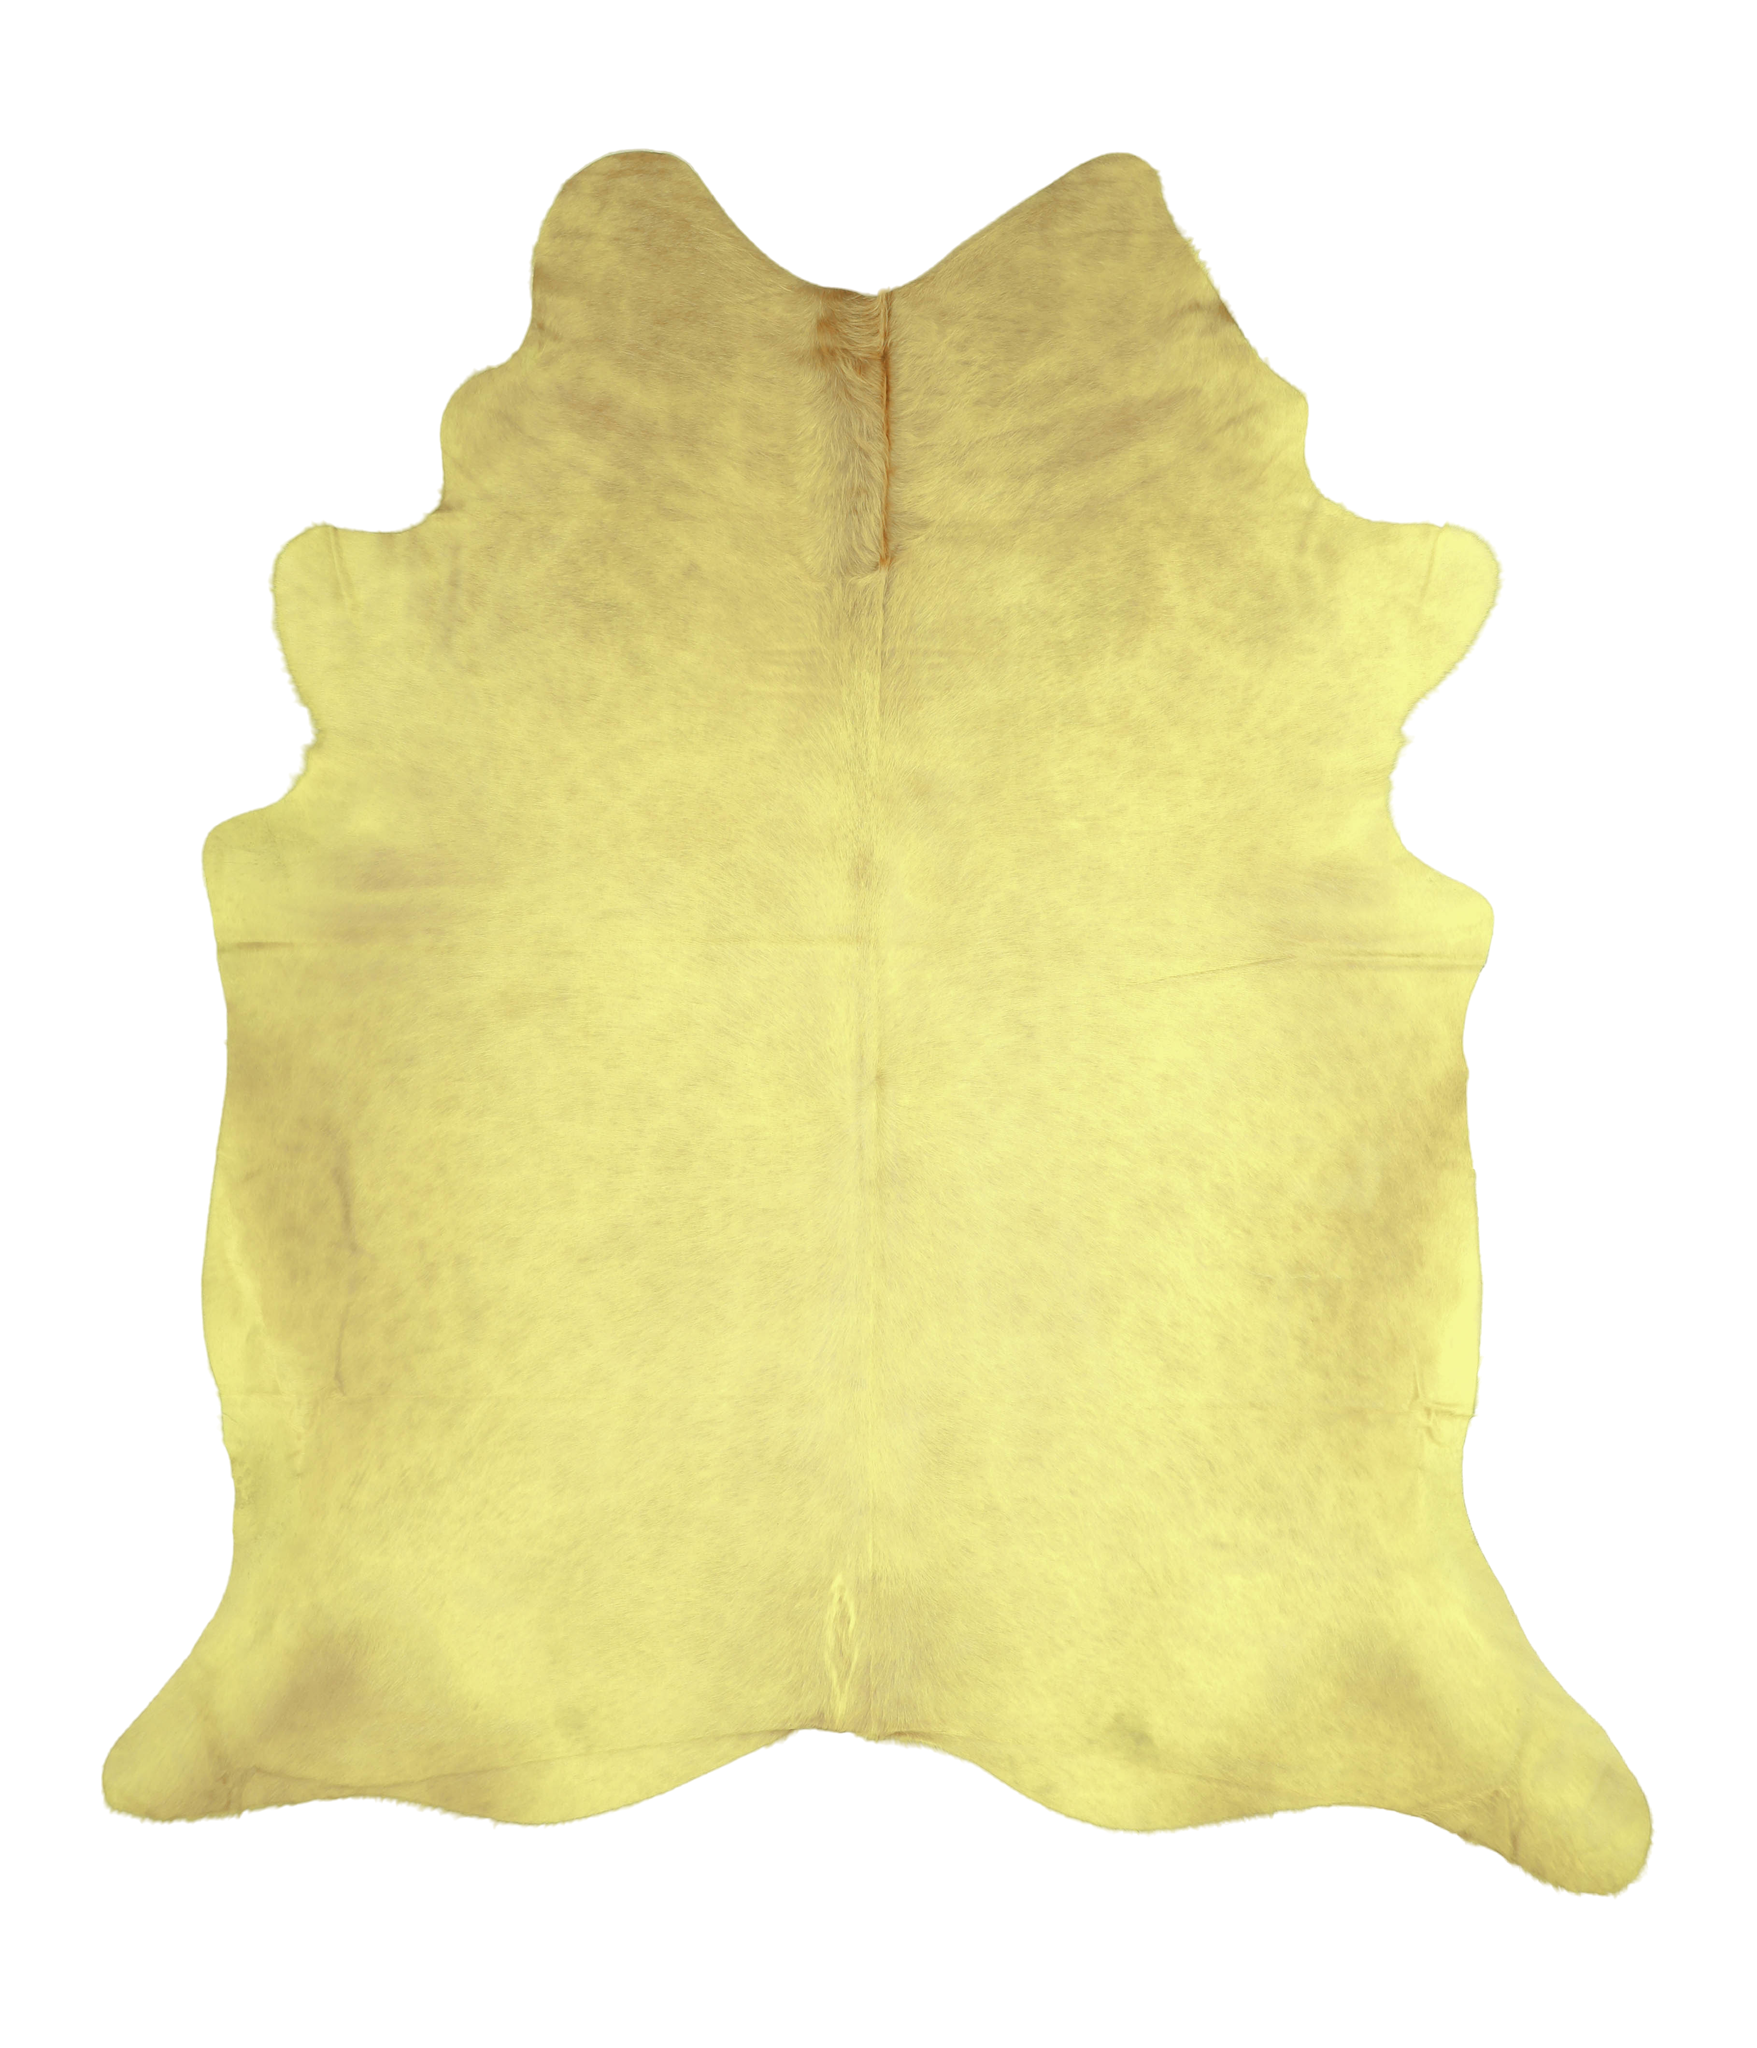 Dyed Yellow Cowhide Rug #A20179